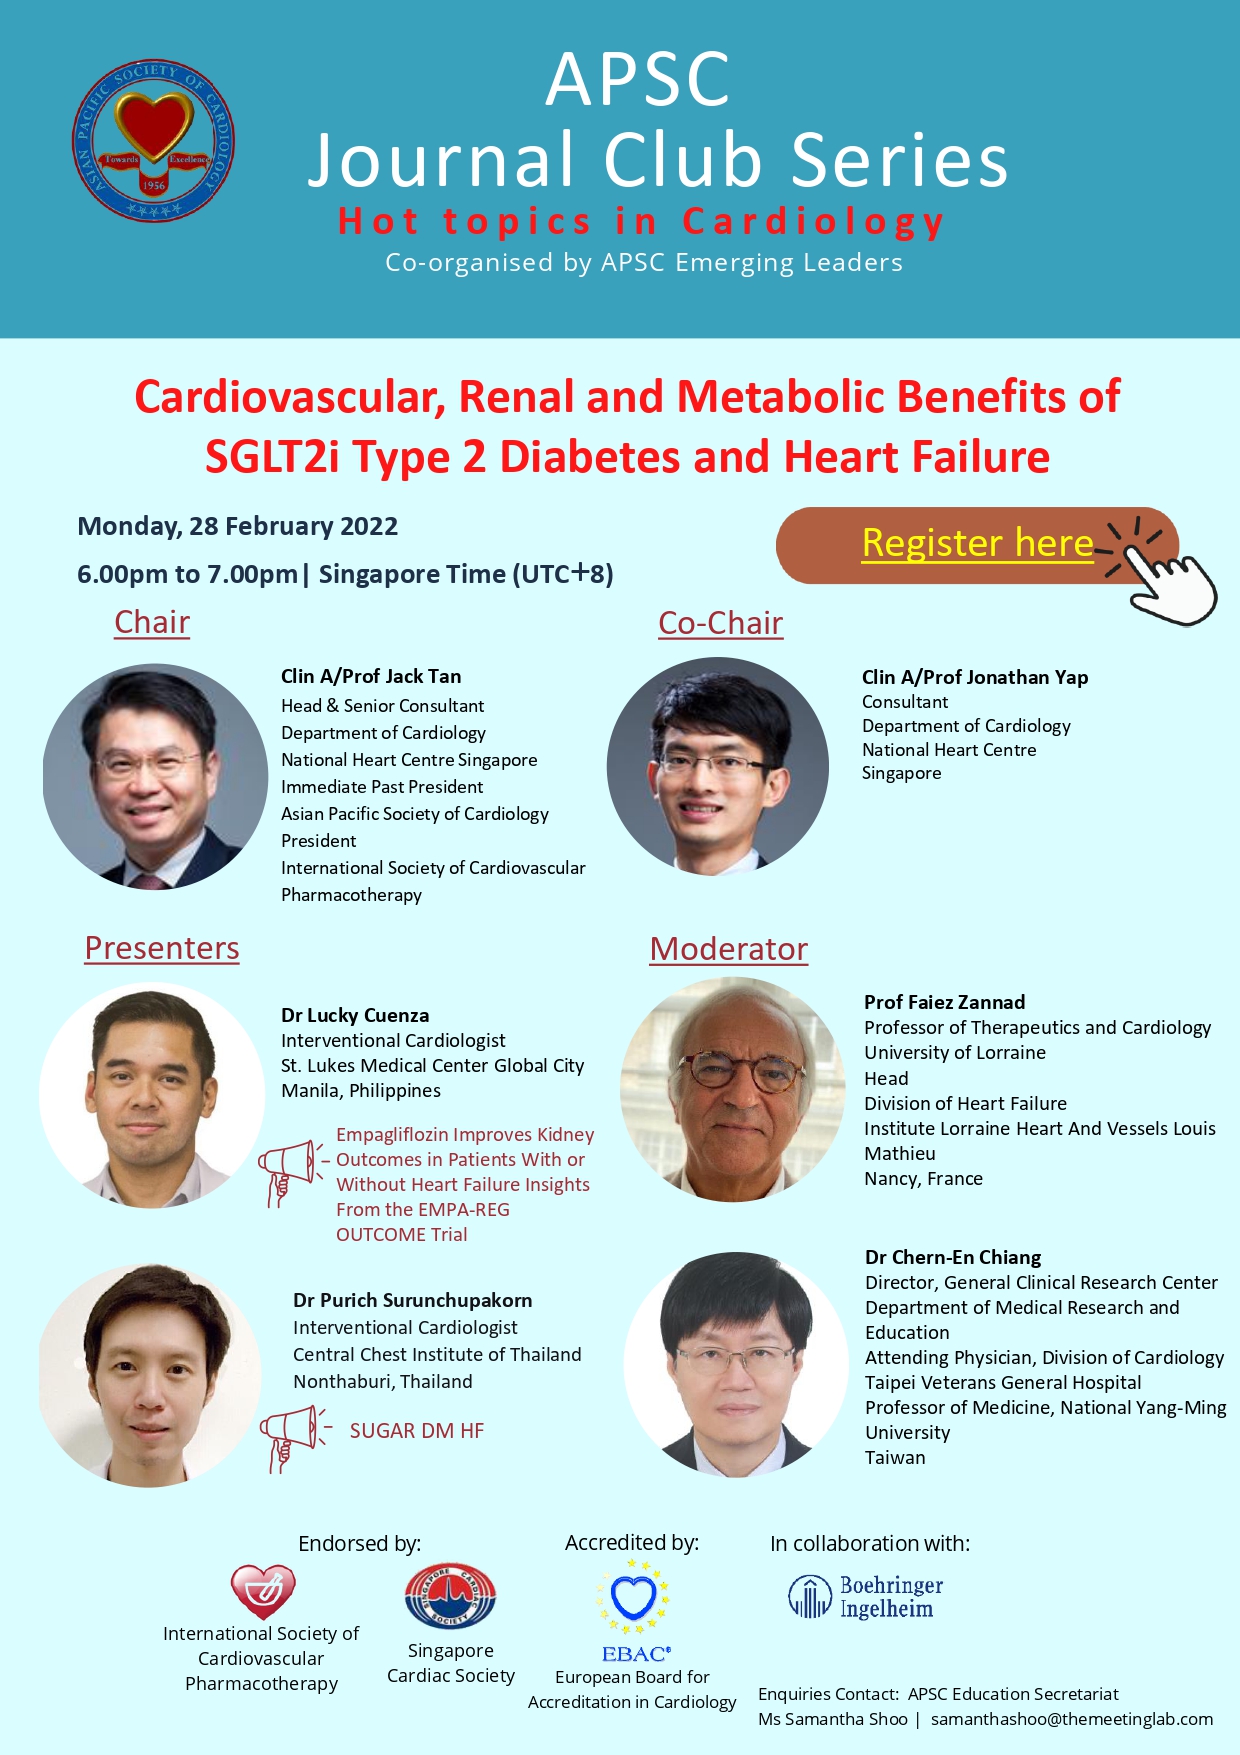 Cardiovascular, Renal and Metabolic Benefits of SGLT2i Type 2 Diabetes and Heart Failure: 28 February 2022